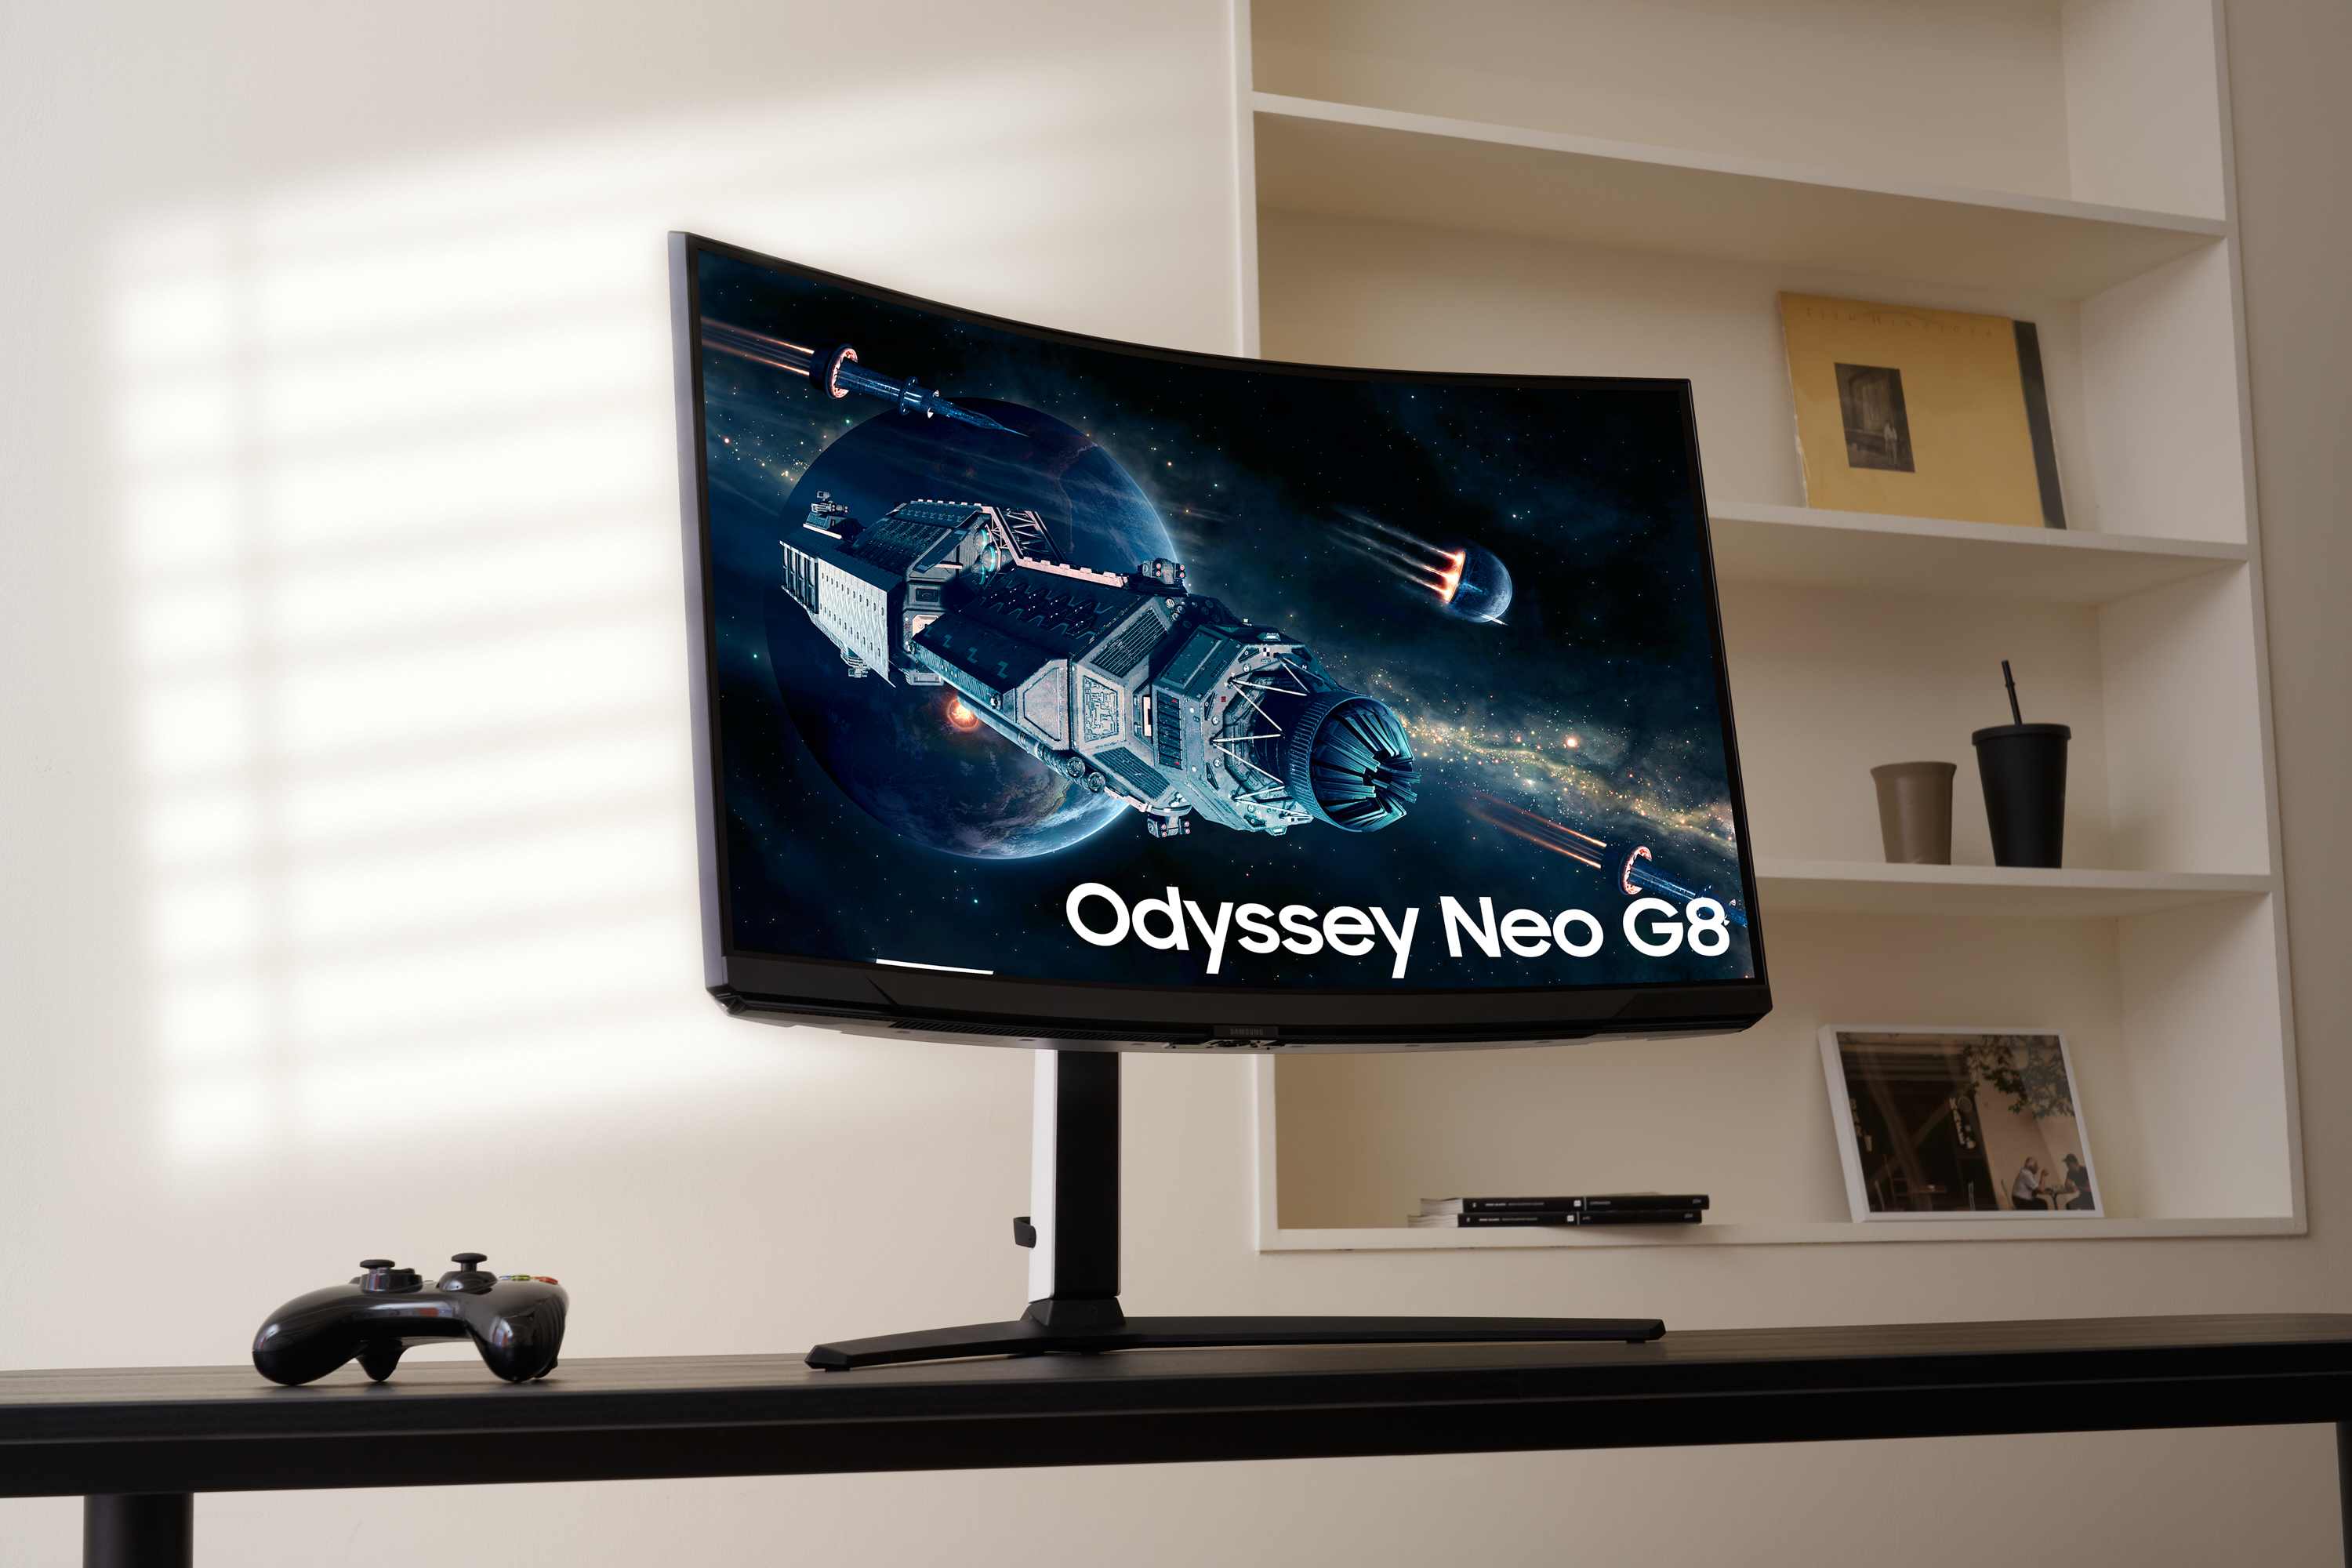 Samsung Electronics Launches World's First 240Hz 4K Gaming Monitor Odyssey  Neo G8 Globally - Samsung Newsroom Global Media Library